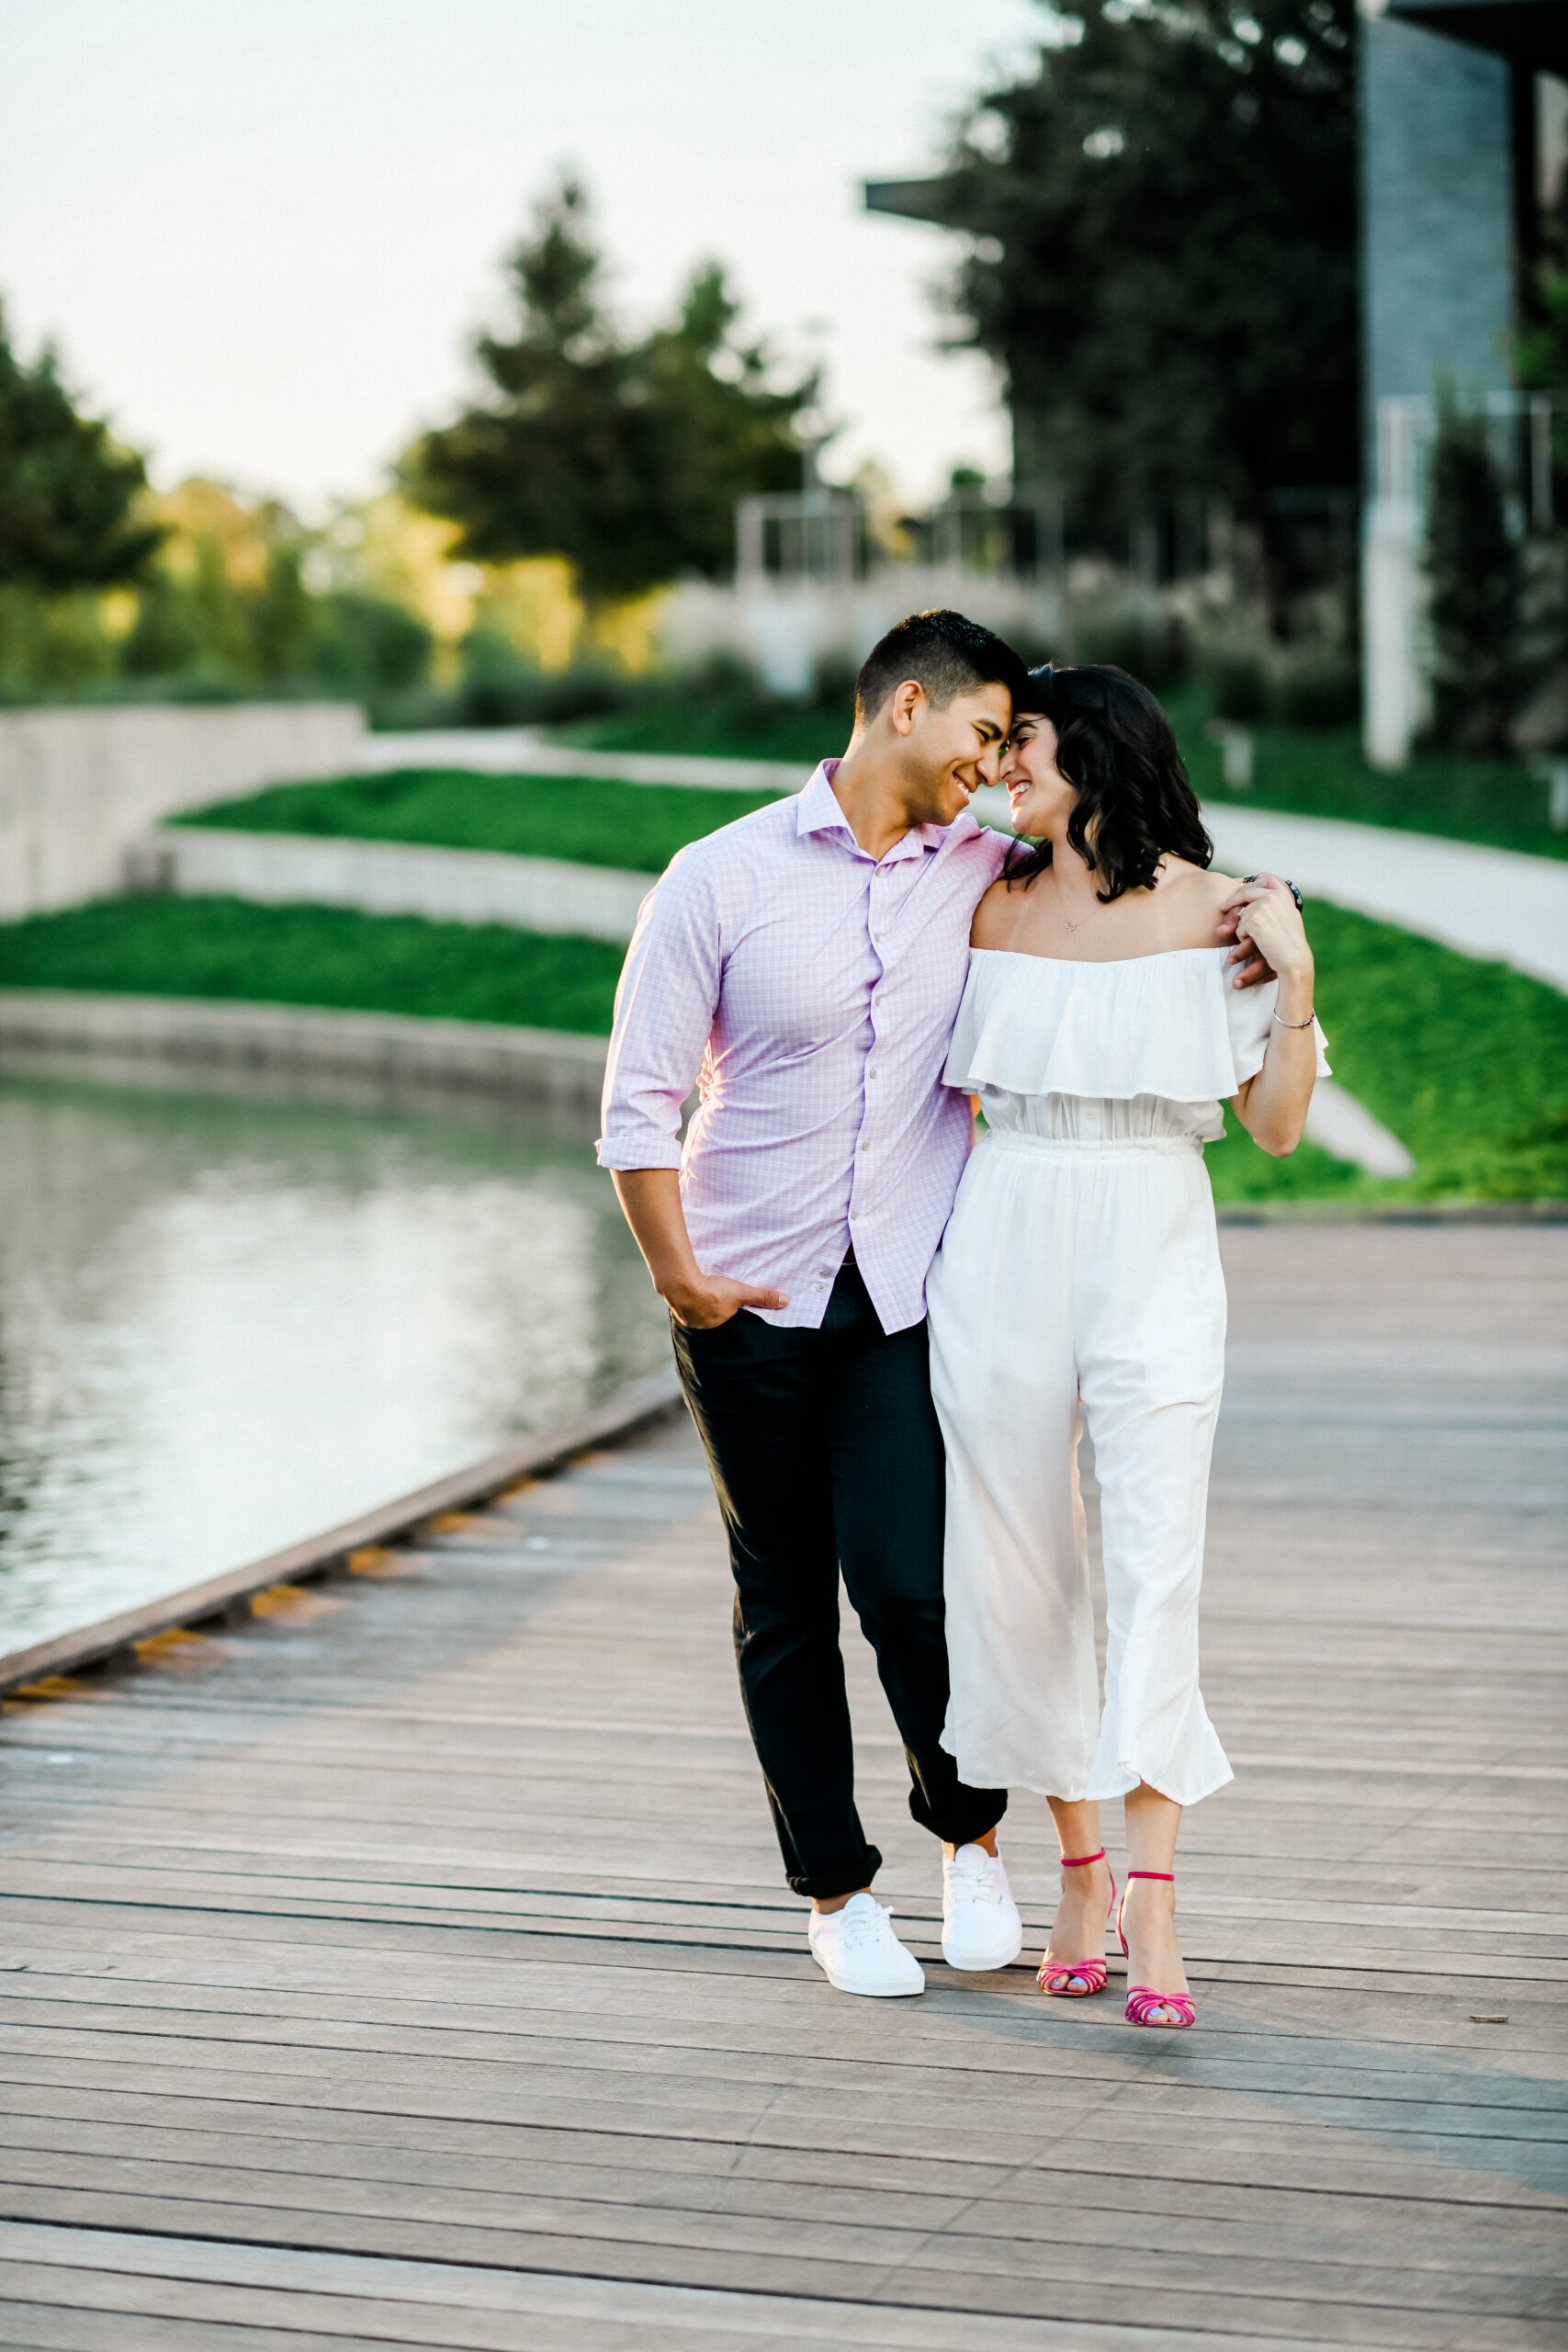 Laura and Rico's Engagement Session in The Woodlands, TX with Rachel Driskell Photography